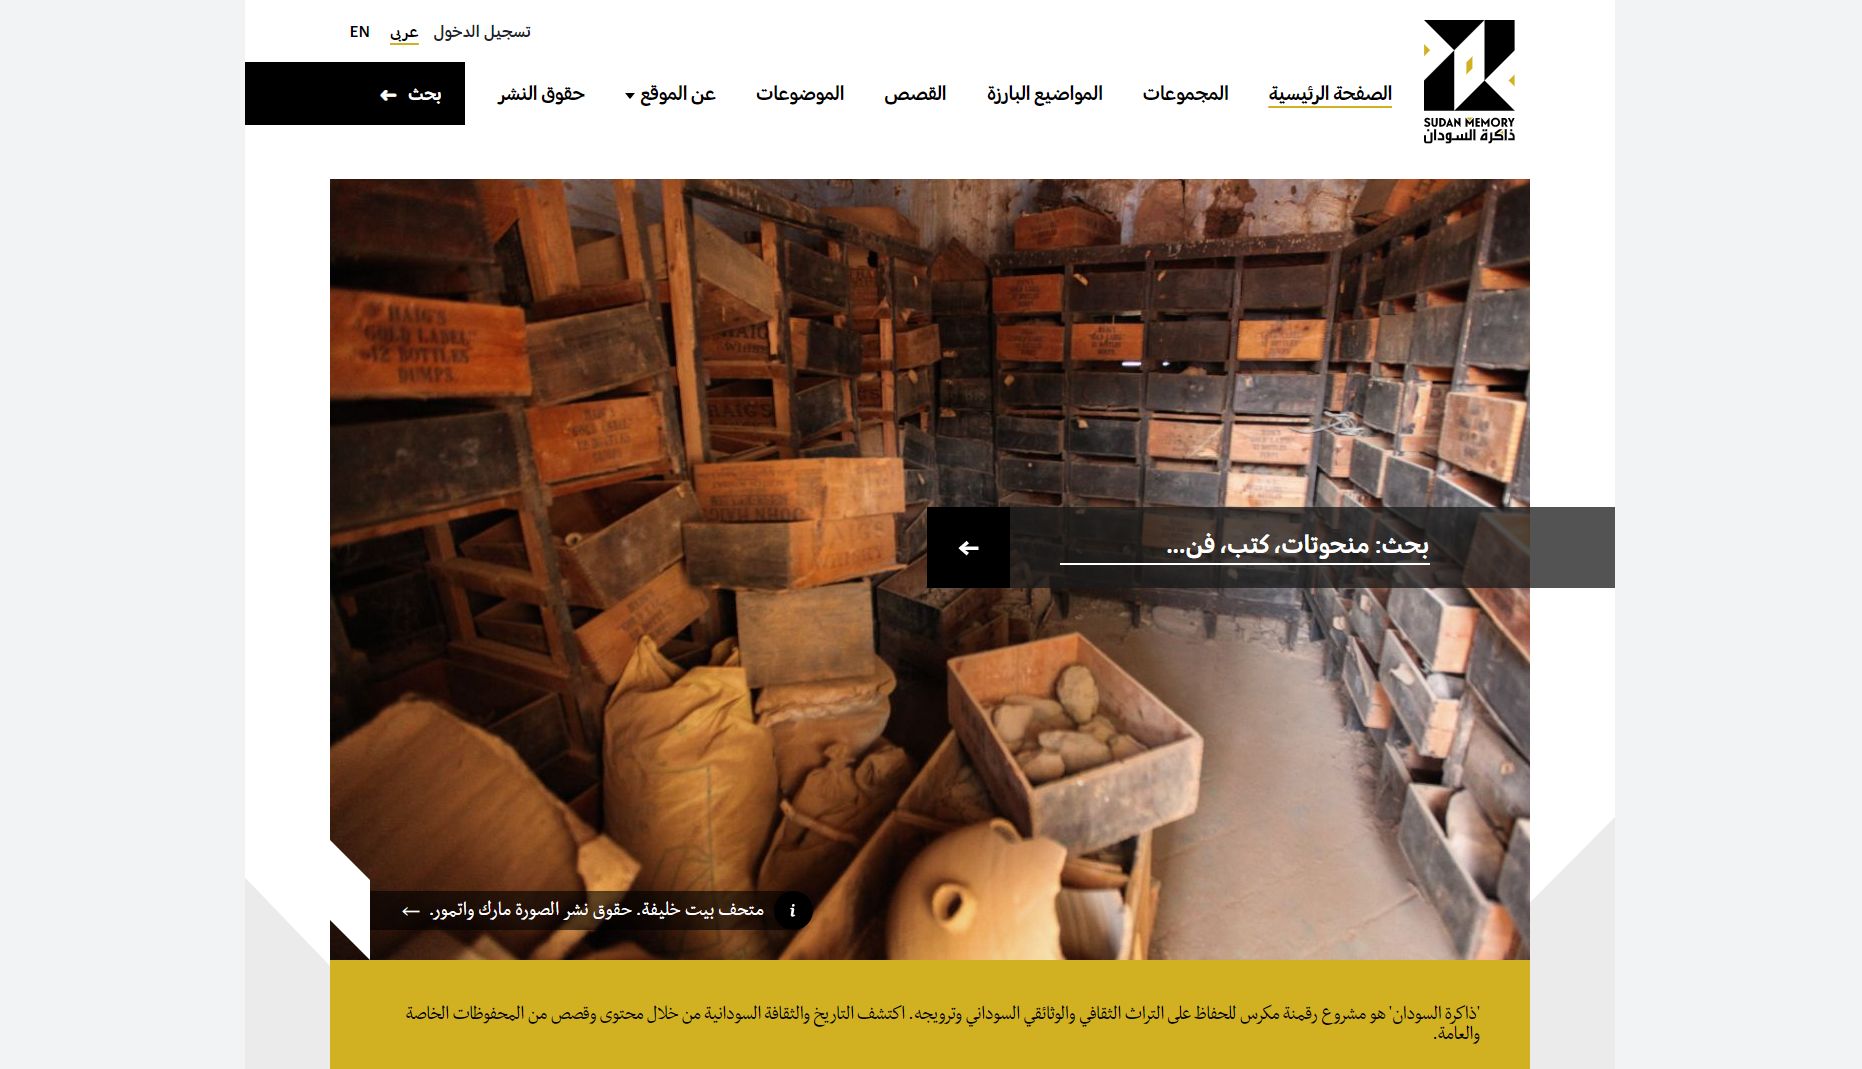 Screenshot from the Sudan memory website showing the Khalifa House Museum store, full of wooden storage boxes, on shelves and on the floor with superimposed Arabic script.